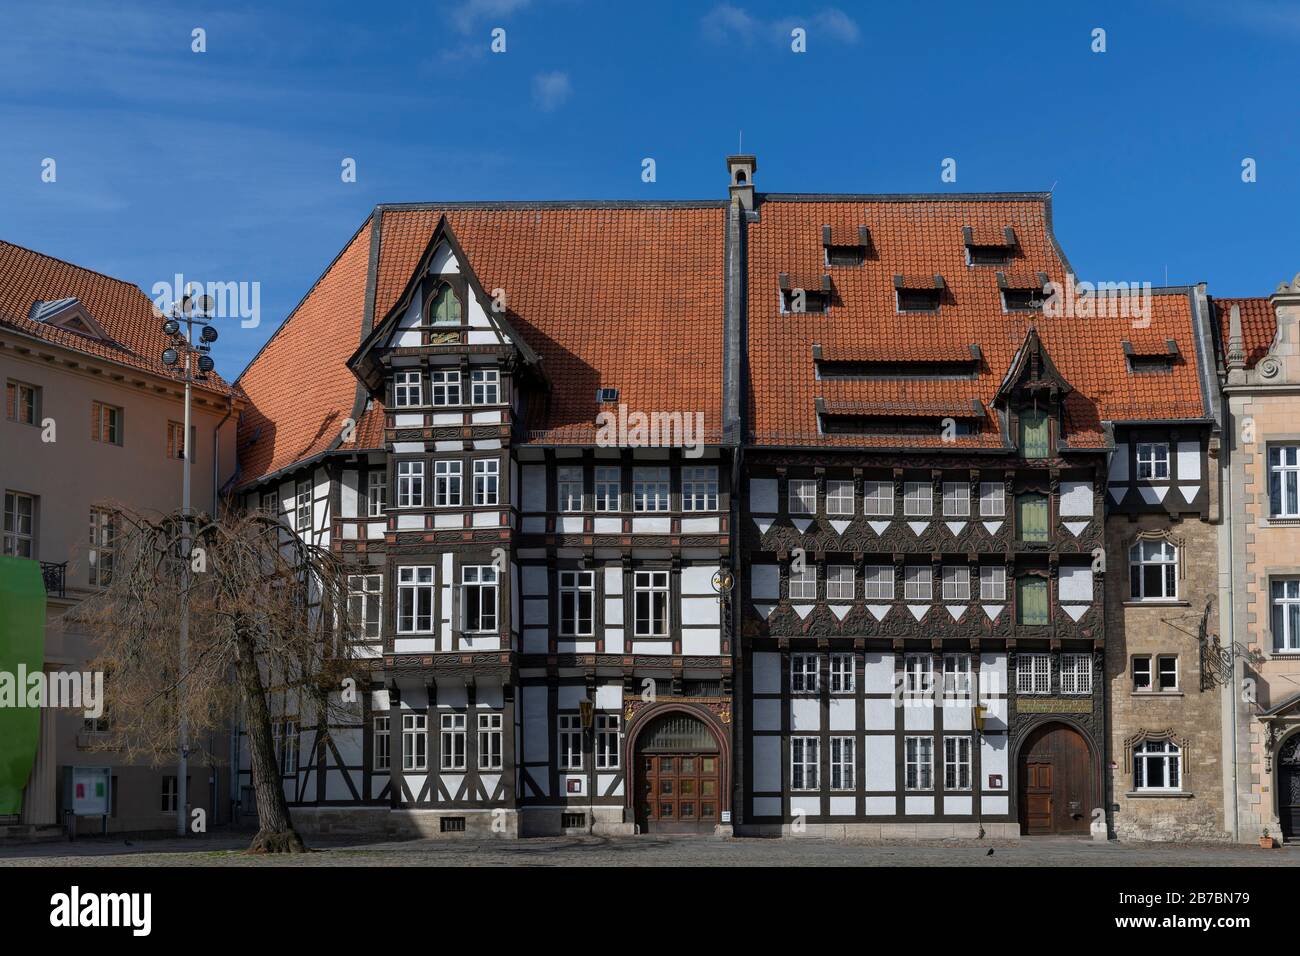 Typical old german style building in Braunschweig with no people Stock Photo